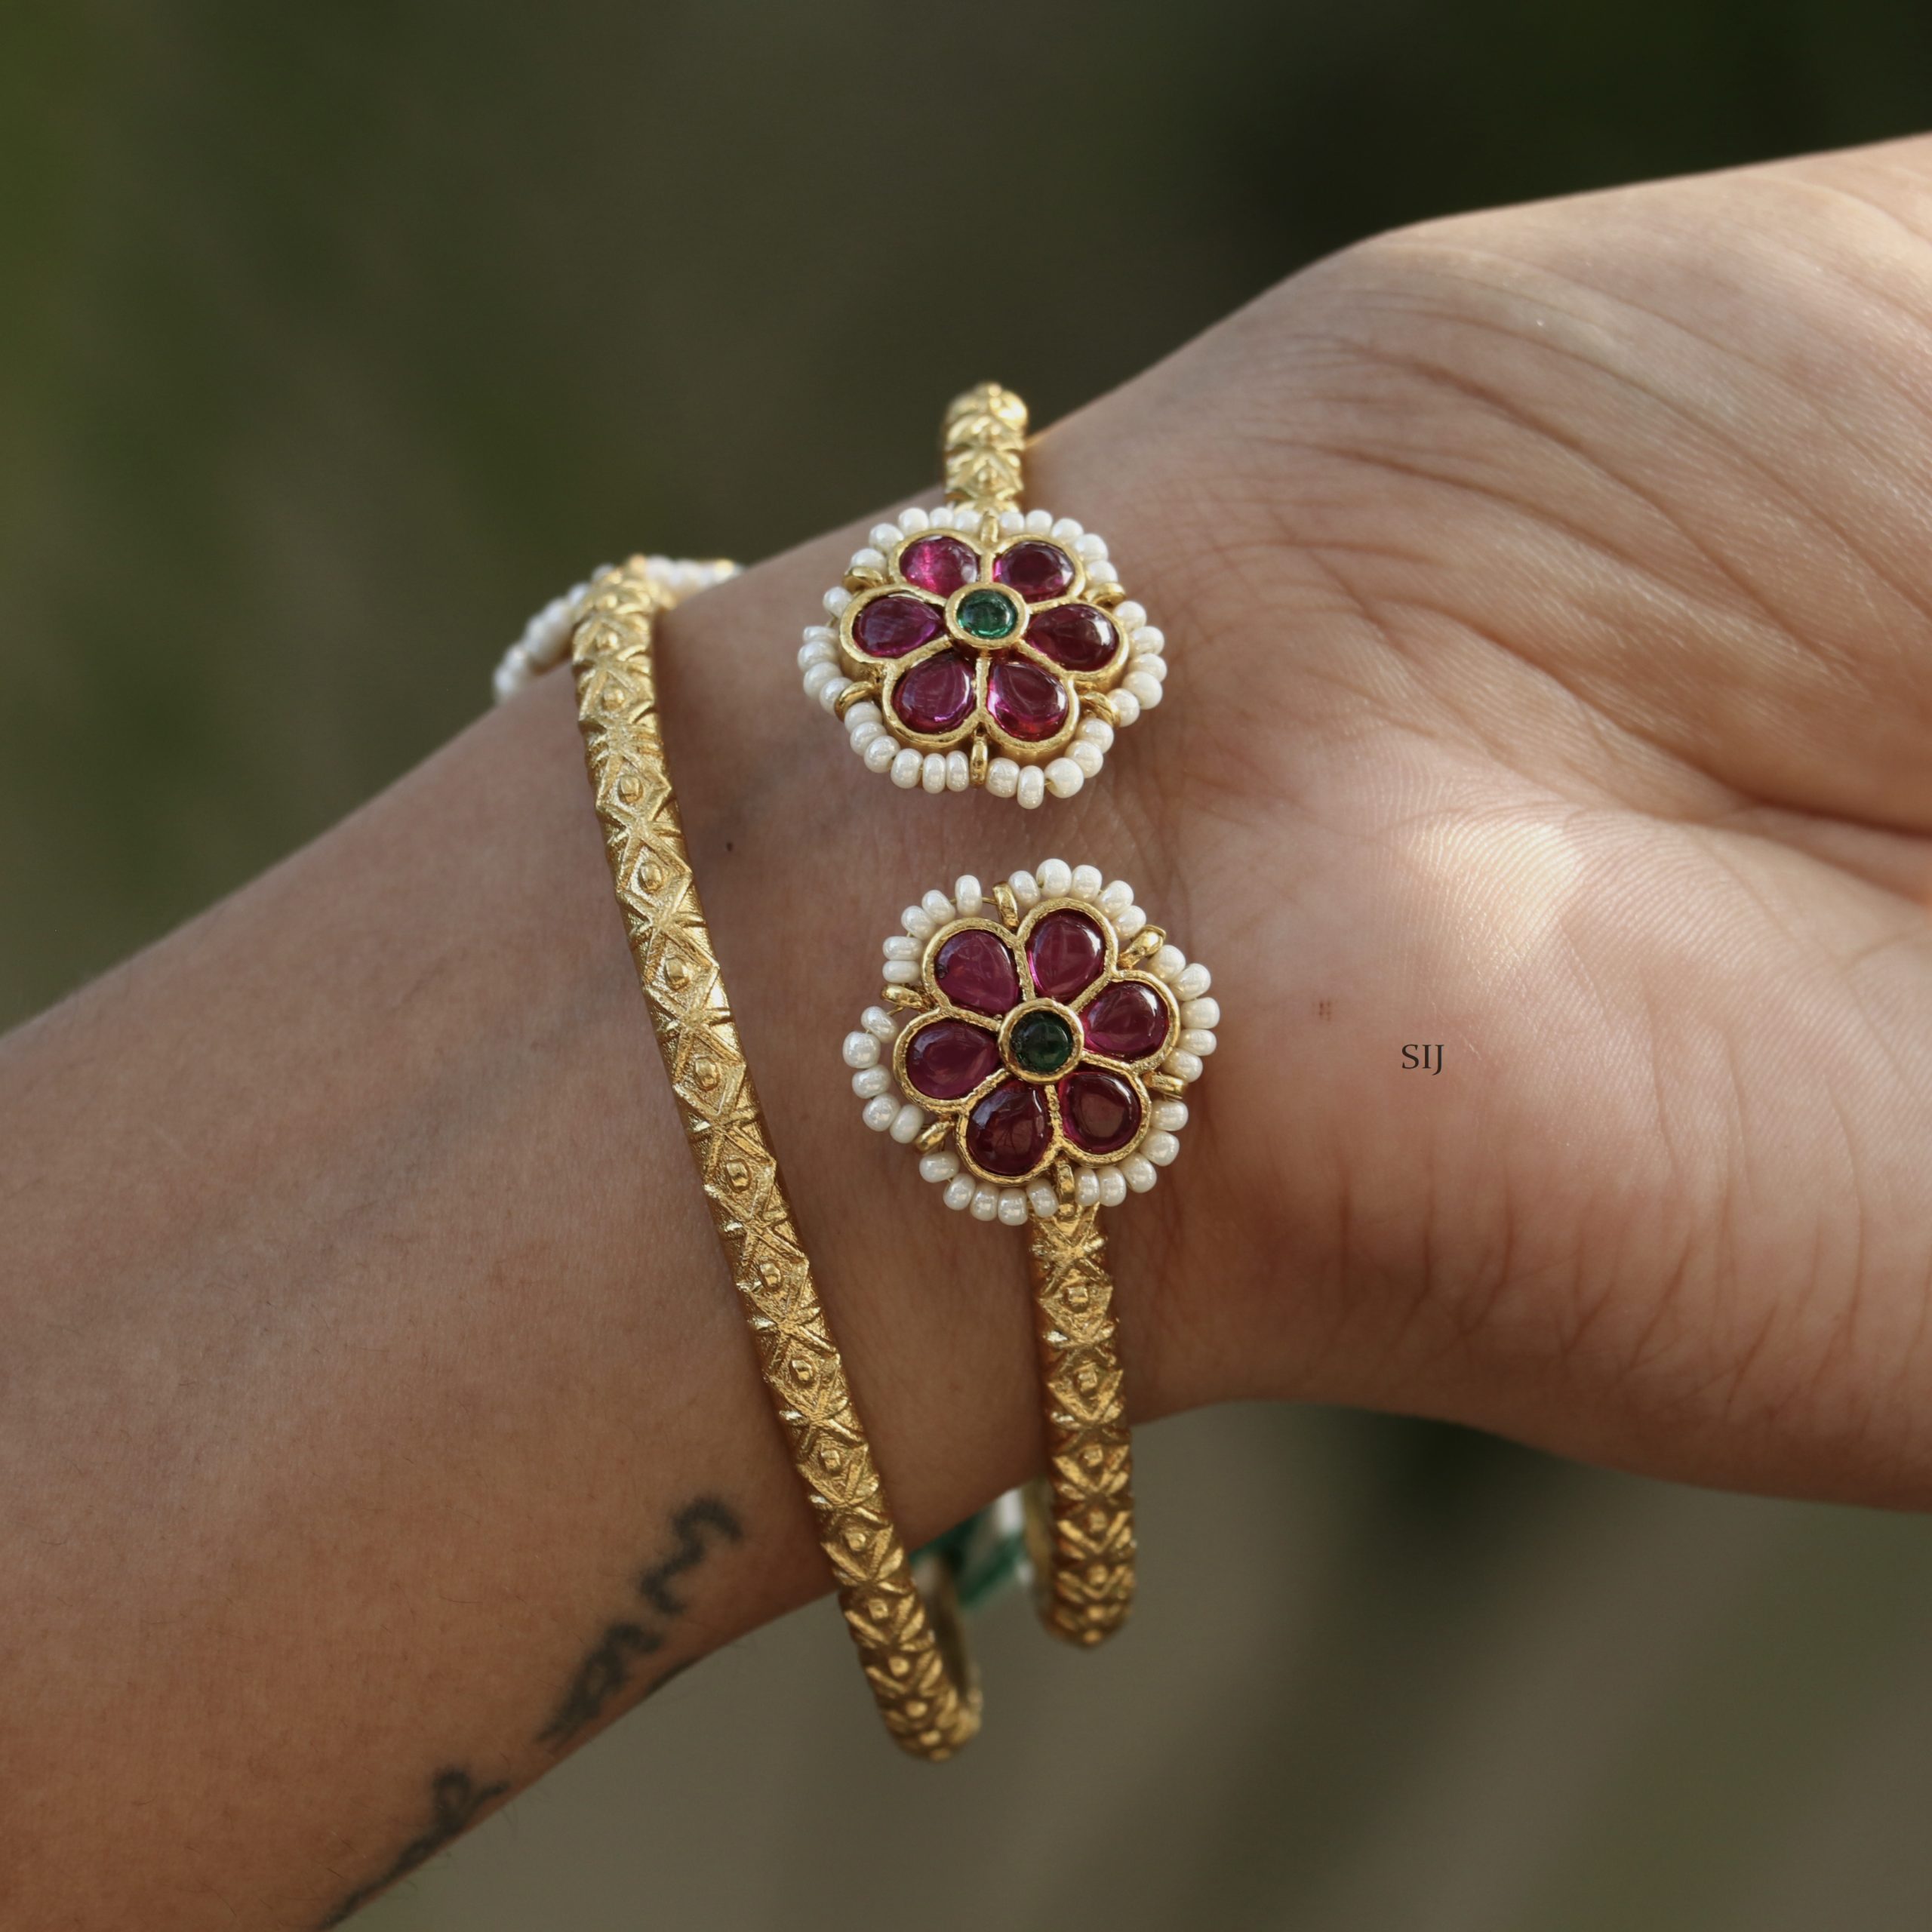 Cute Round Flower Kemp Bangles with White Beads